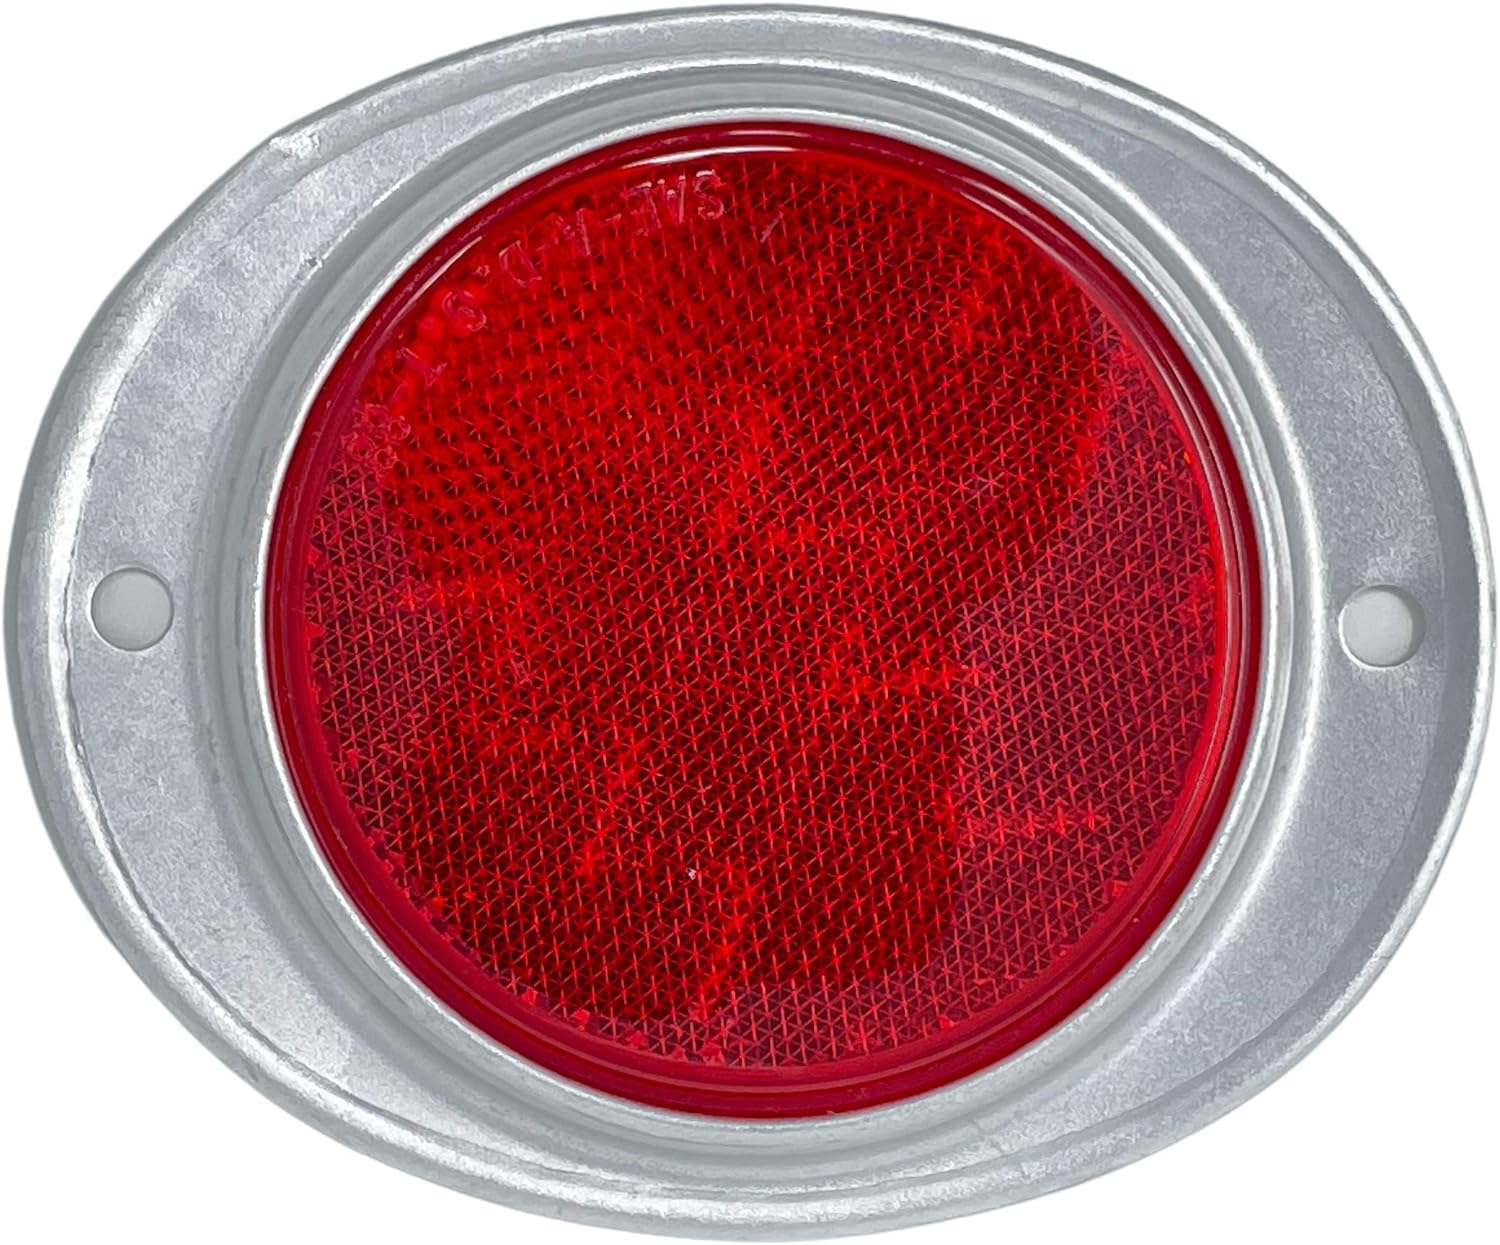 All Star Truck Parts [ALL STAR TRUCK PARTS] Amber/Red 3&#226;&#128;&#157; Round Reflector with Aluminum Base Screw On 2 Holes for Trucks